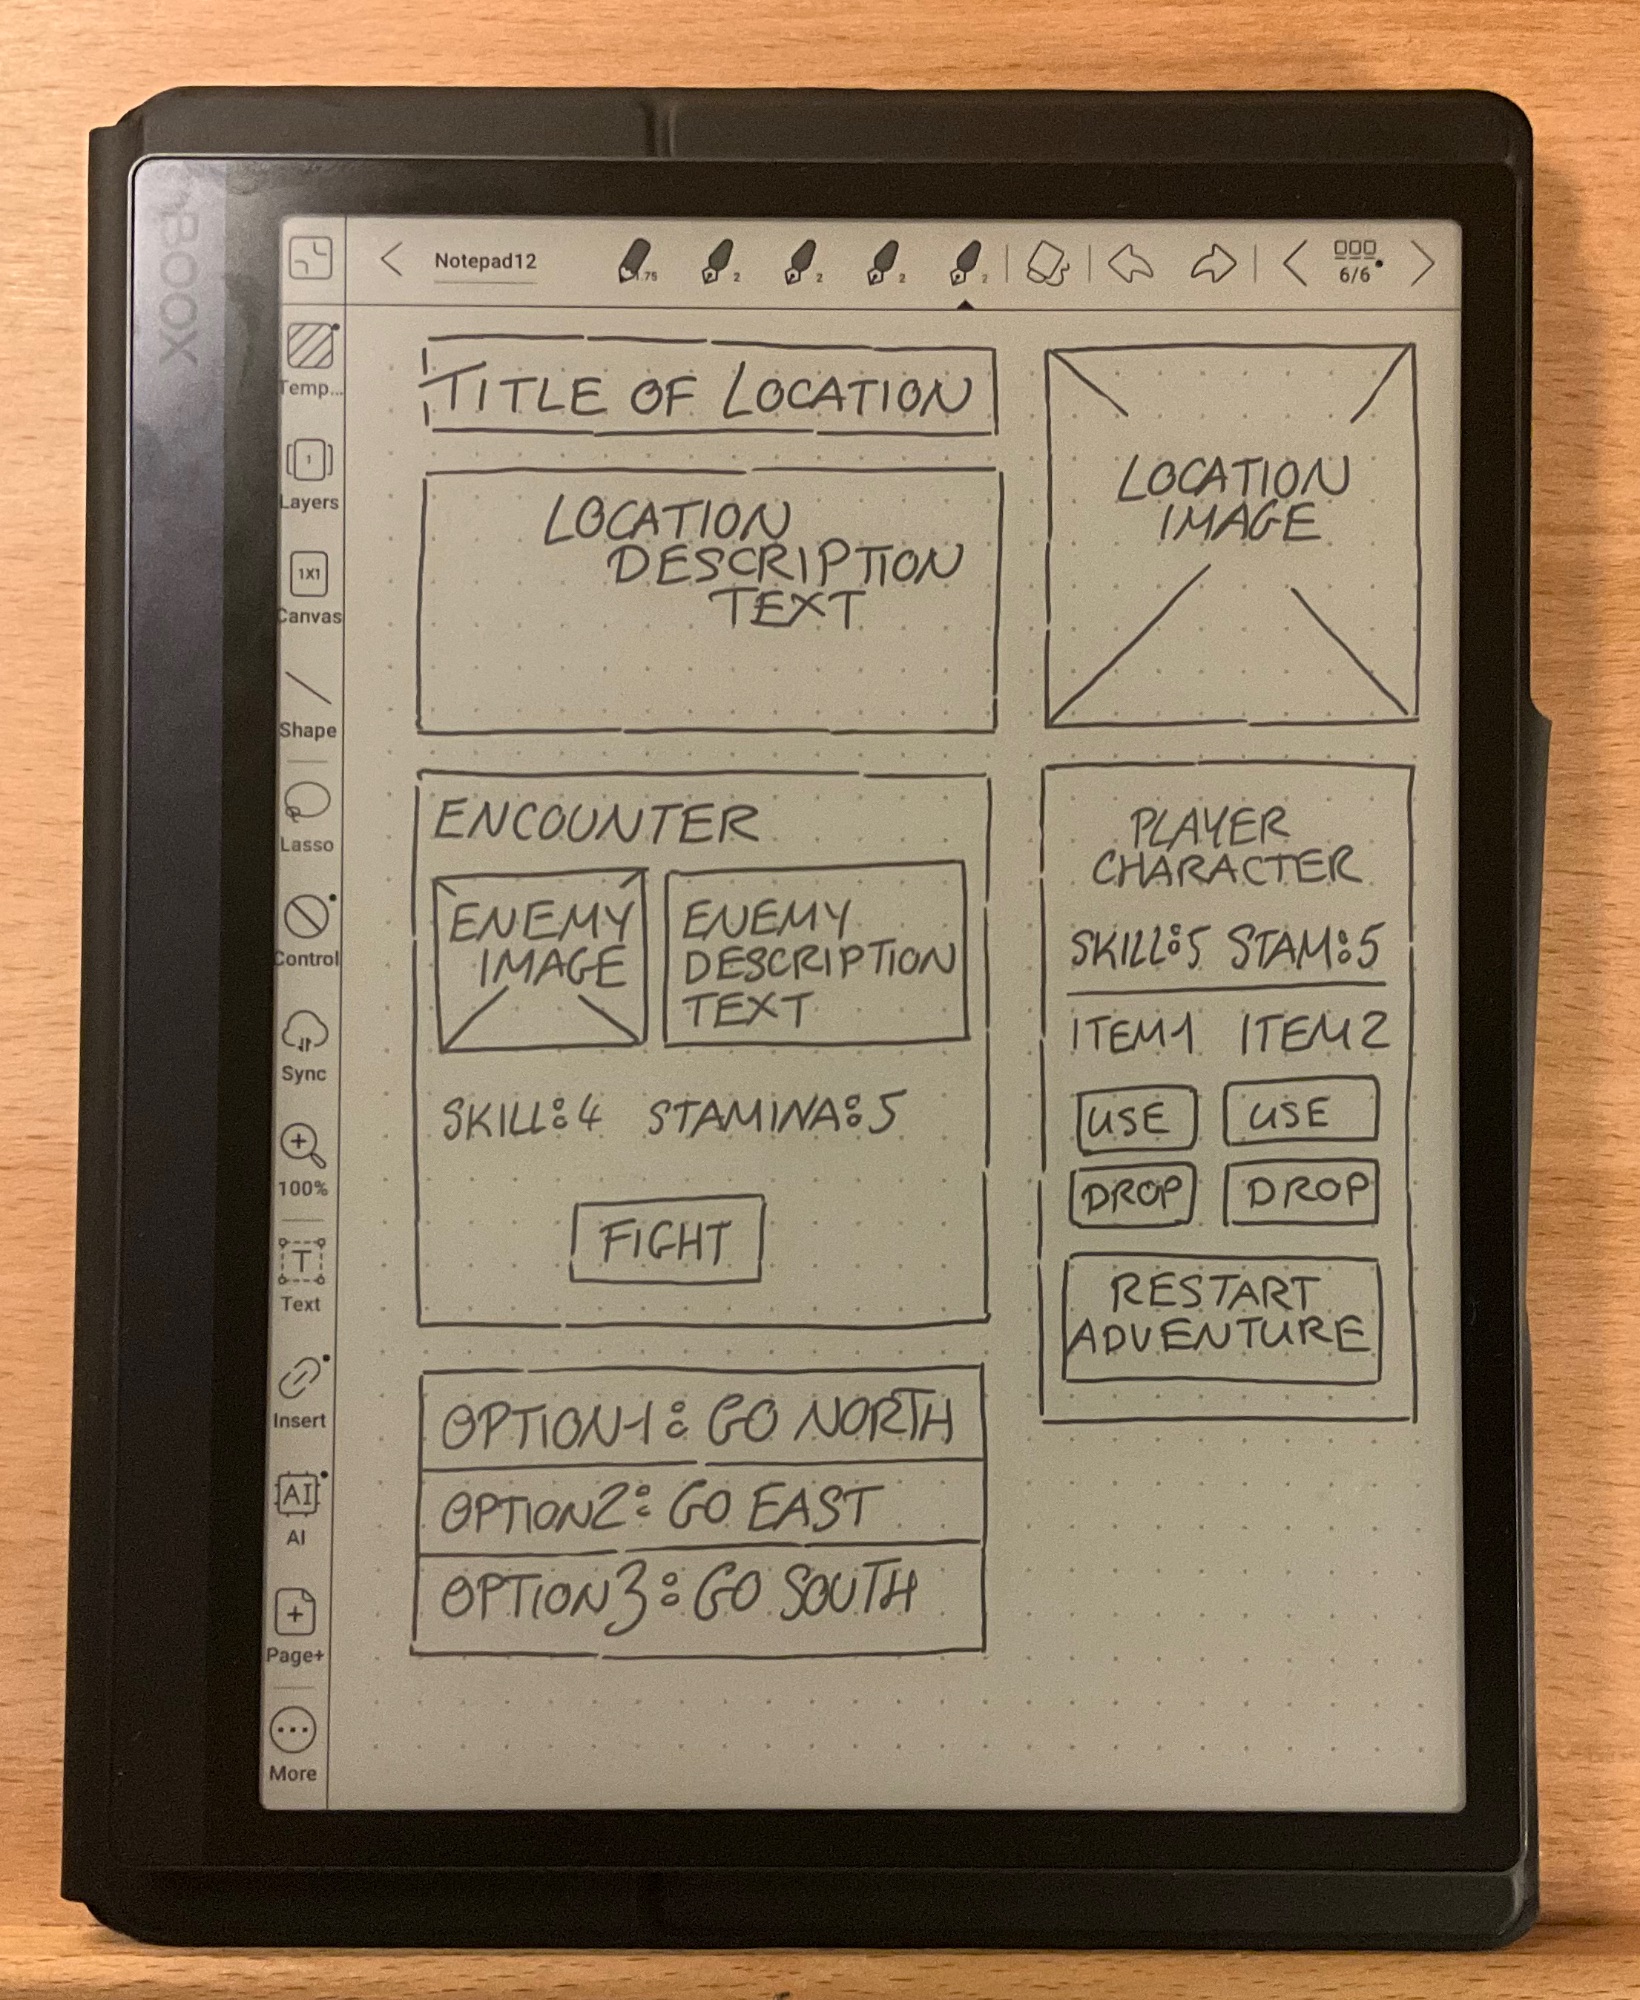 The initial sketch of the user interface